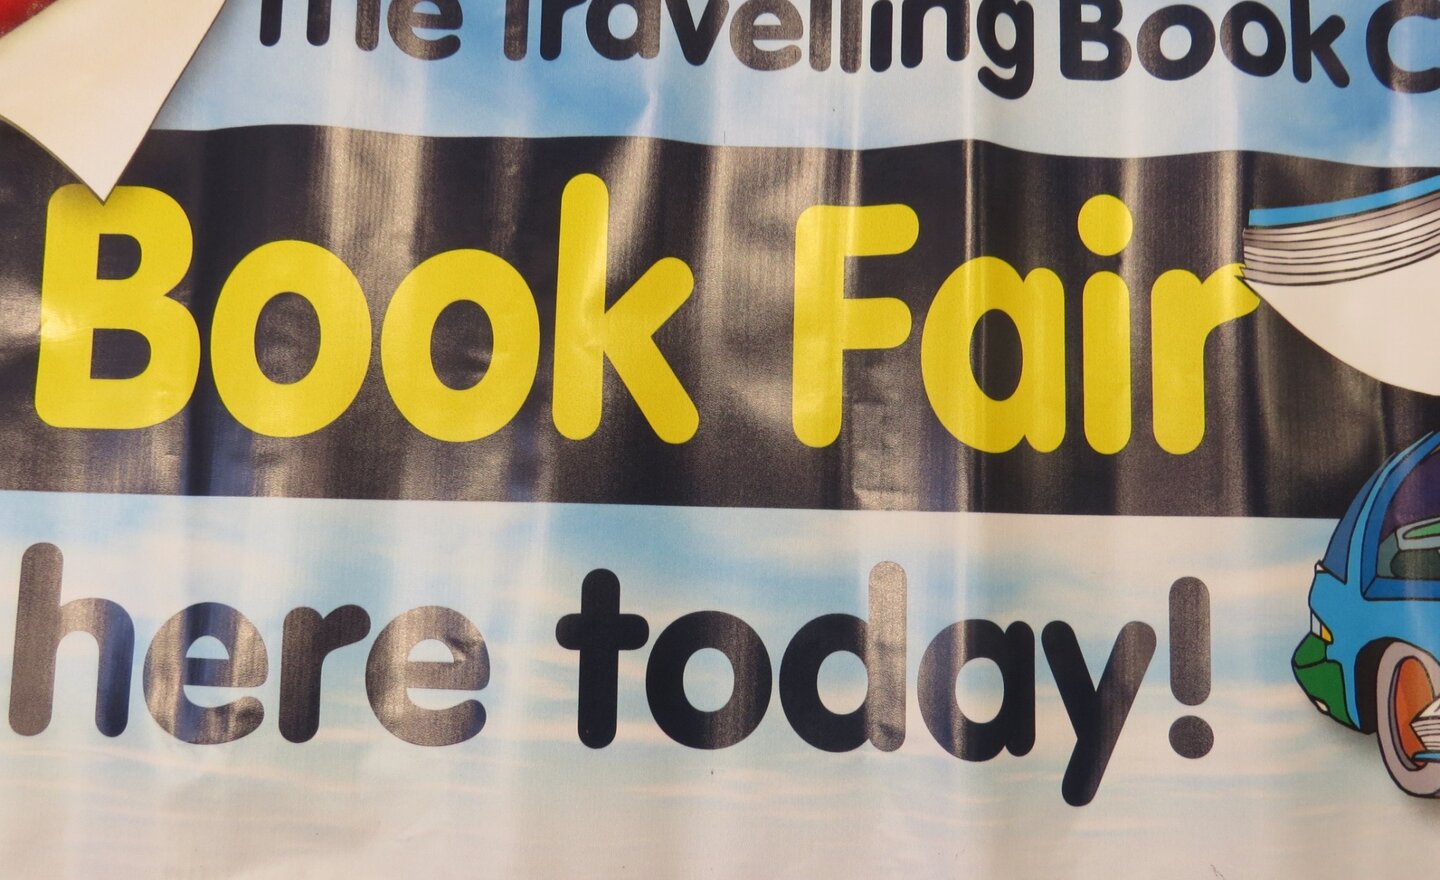 Image of There's a Book Fair in Town!